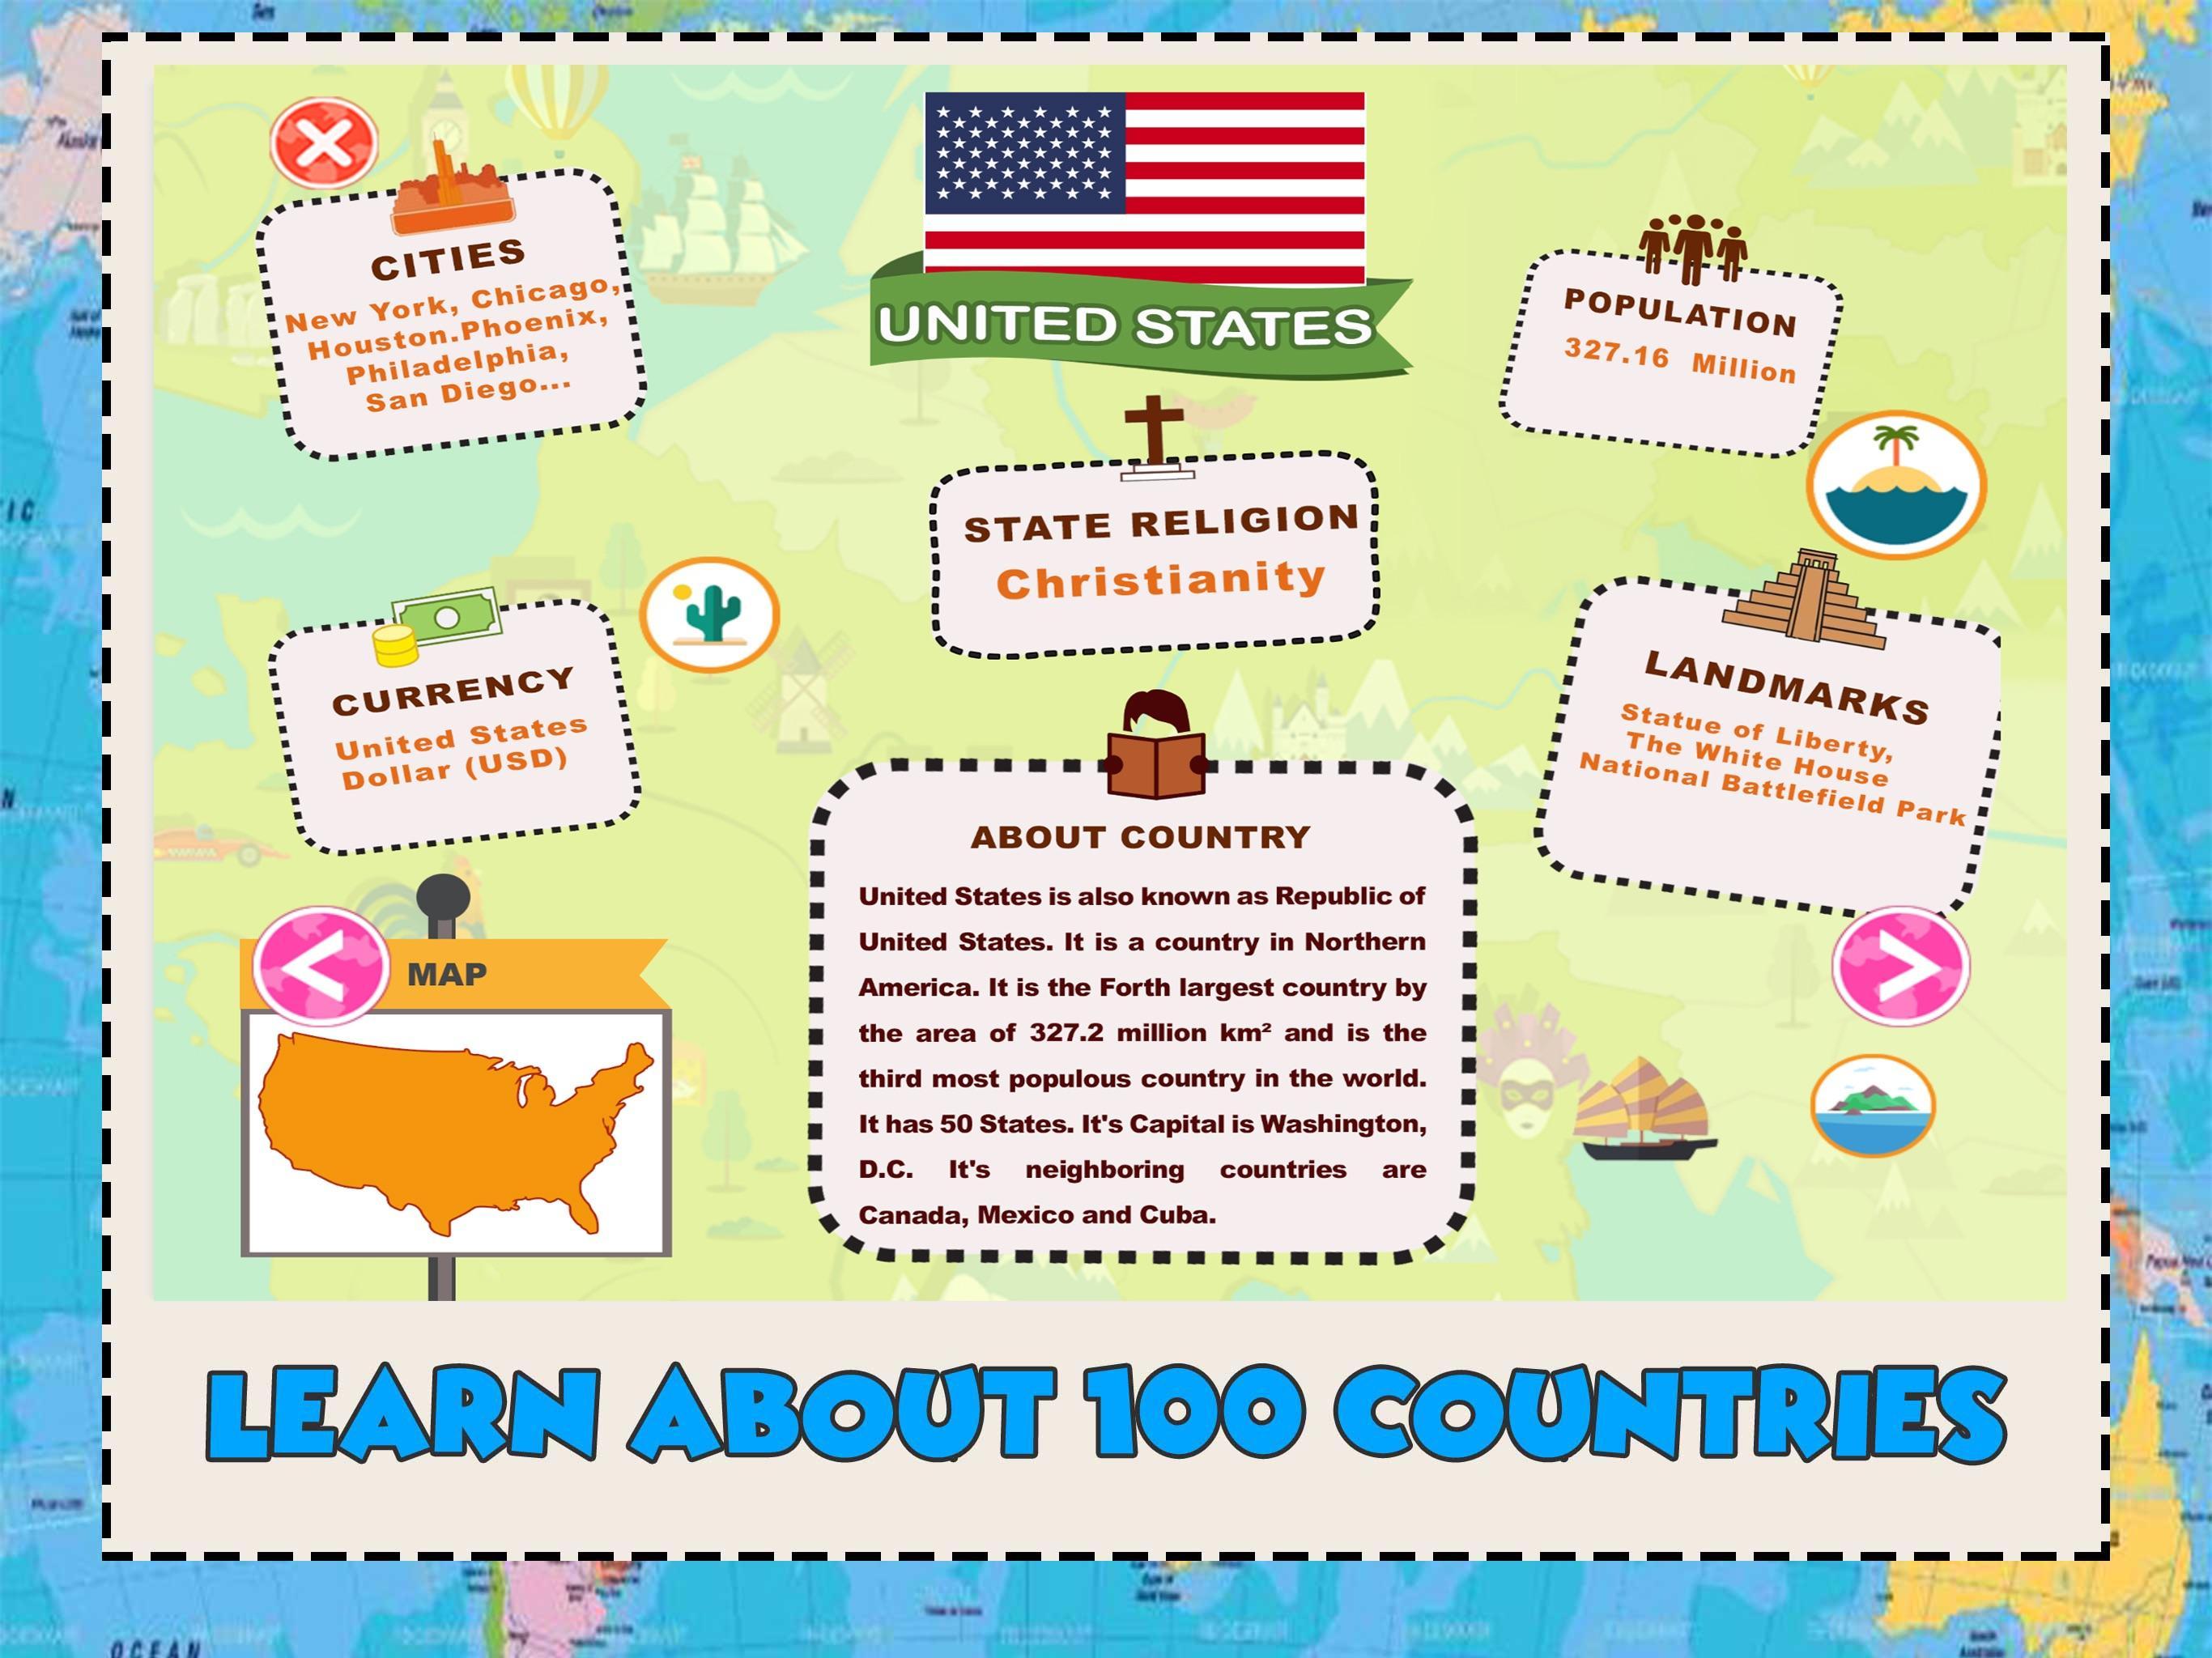 World Geography Games For Kids - Learn Countries 2.5 Screenshot 1